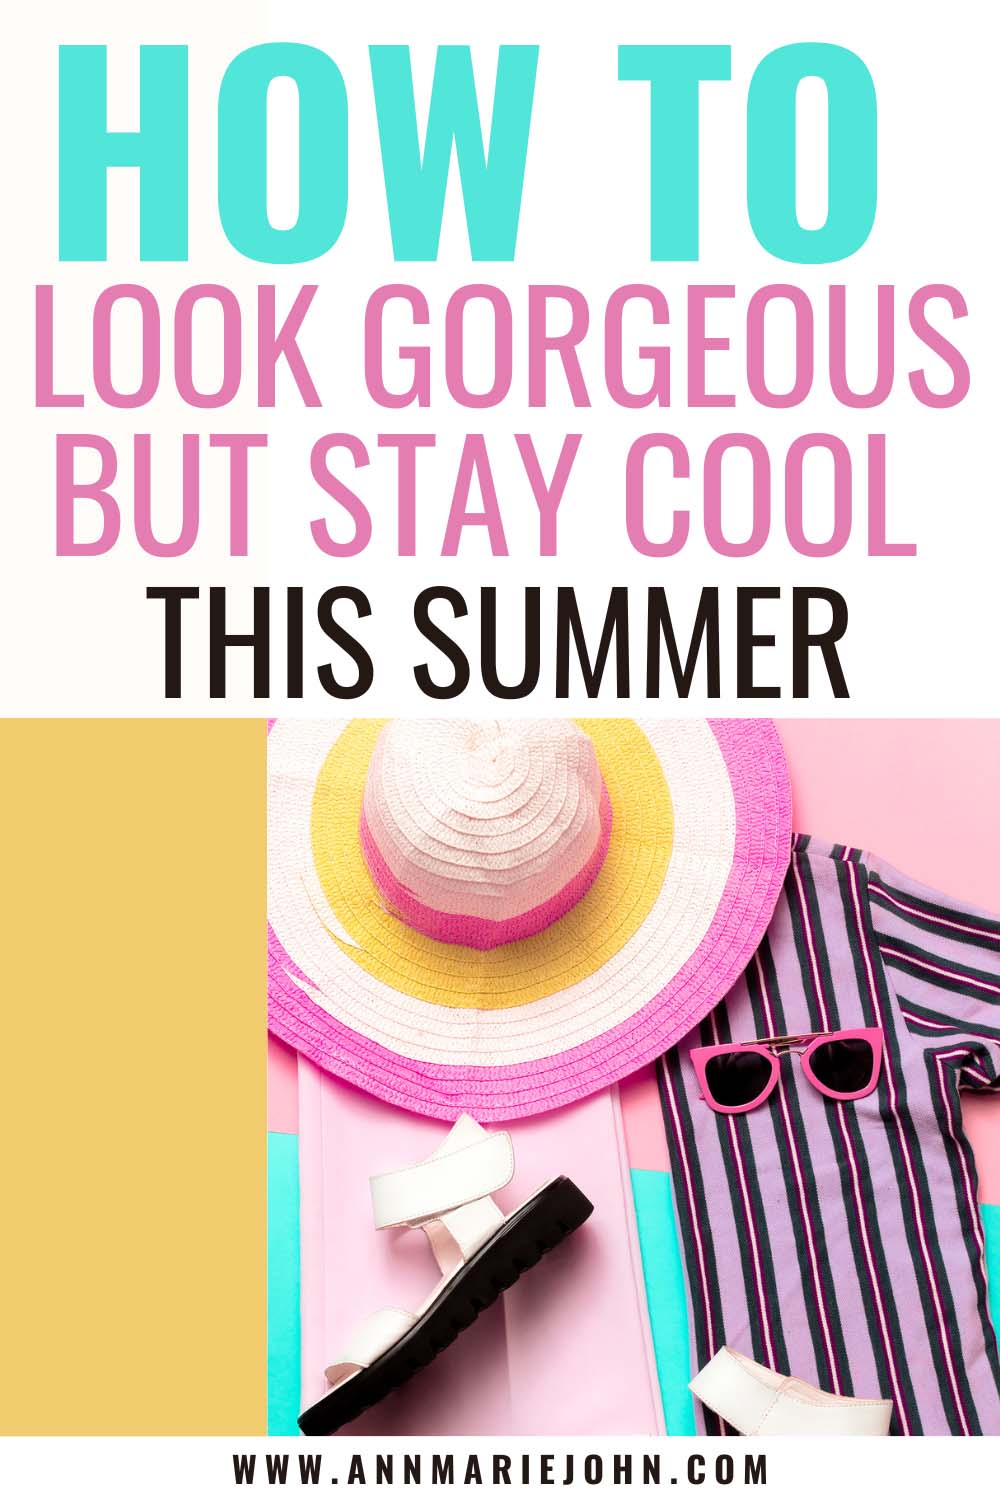 How to Look Gorgeous But Stay Cool This Summer